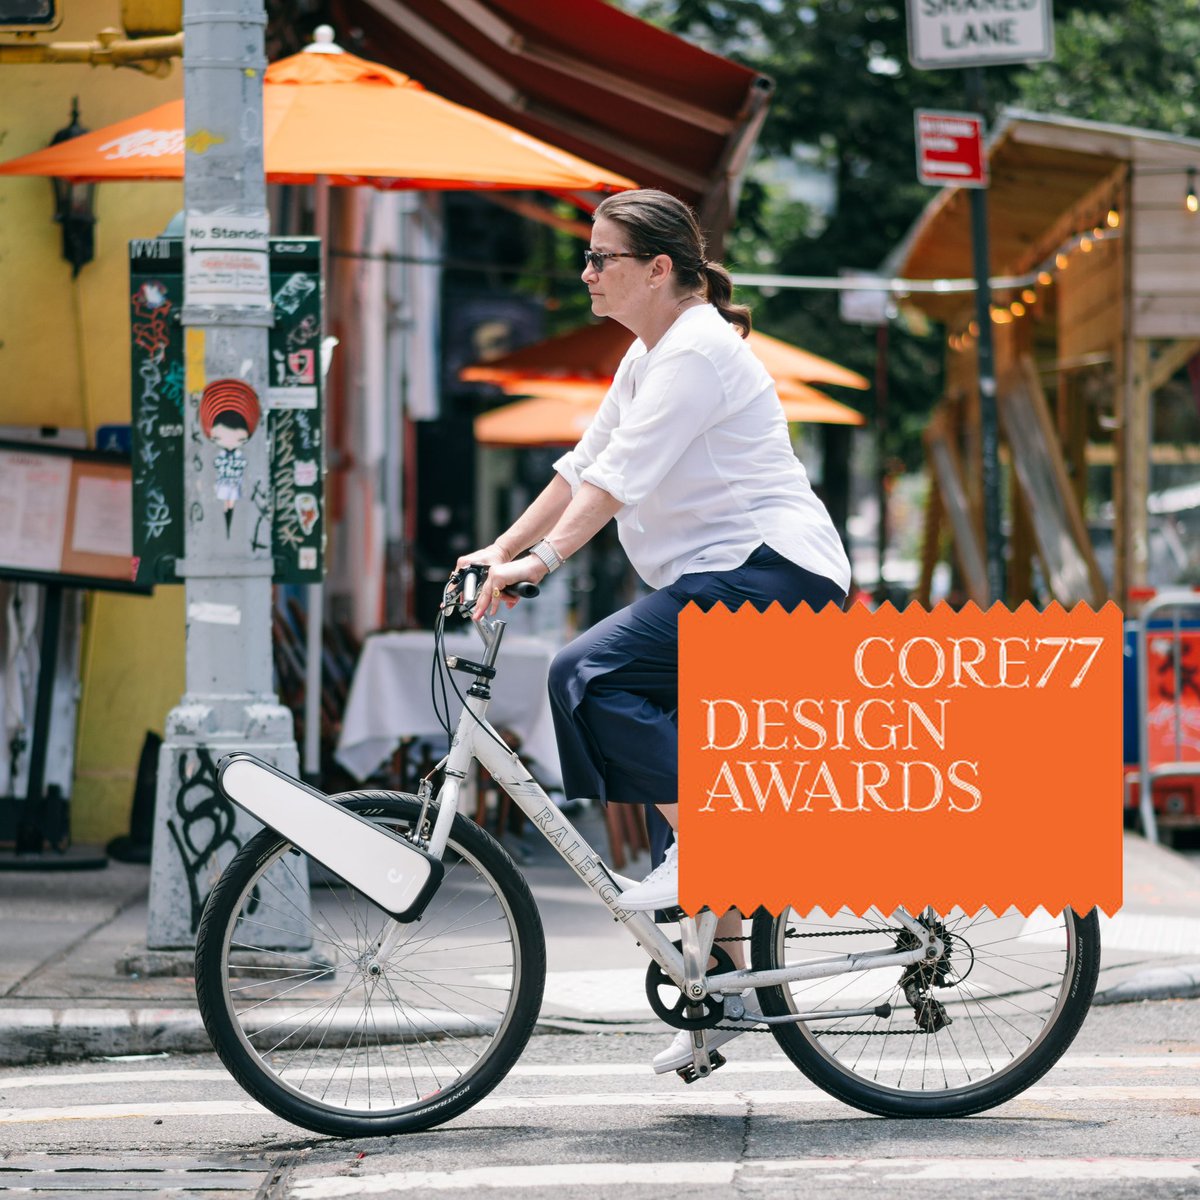 Design is at the core of everything we do as a company @CLIP_bike So it's all that more brilliant to be recognized for this by the @core77 design awards in the transportation category this year. #design #transportation #bikes #clipbike